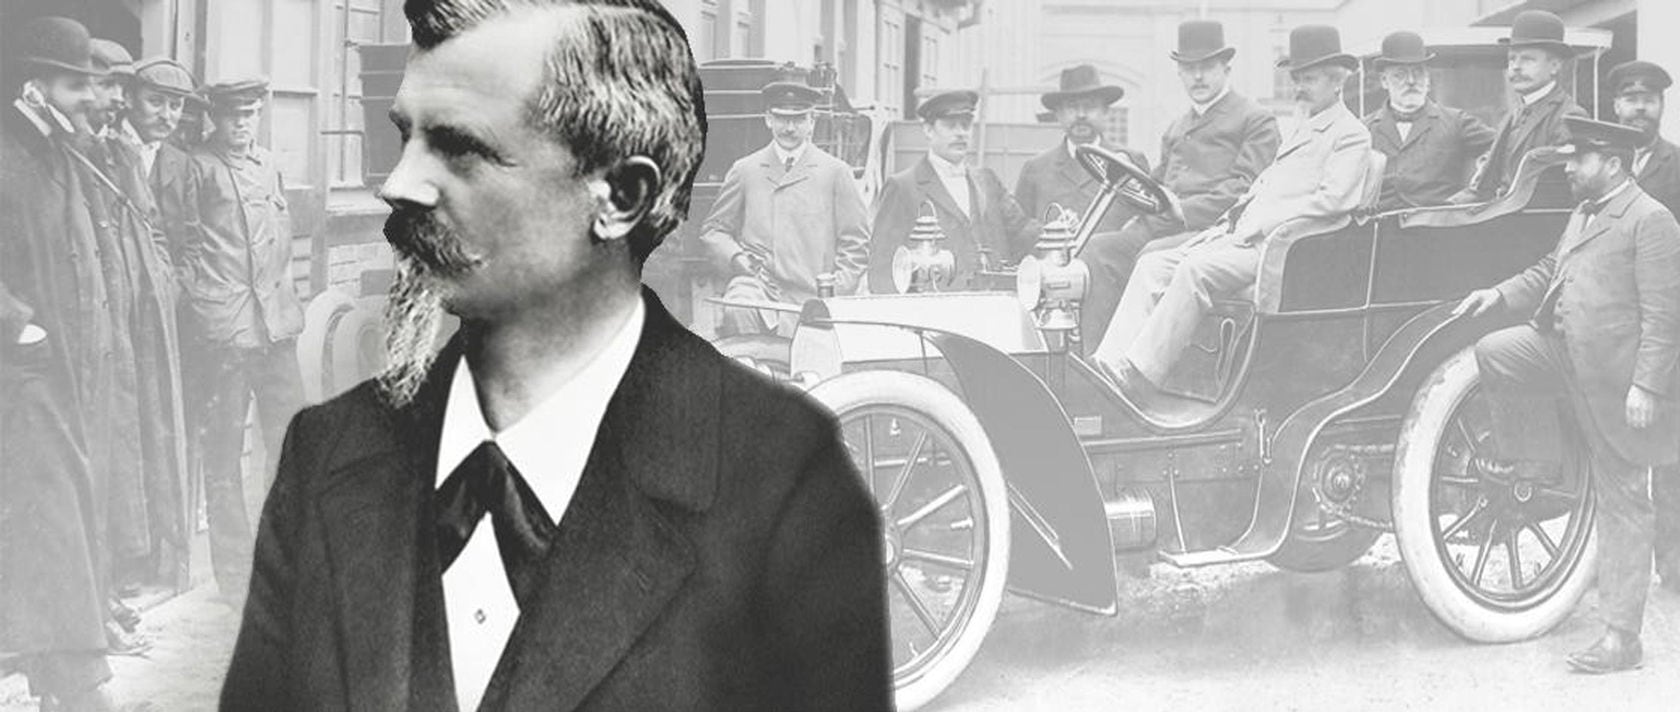 Benz Patent Motor Car: The first automobile (1885–1886)  Mercedes-Benz  Group > Company > Tradition > Company History